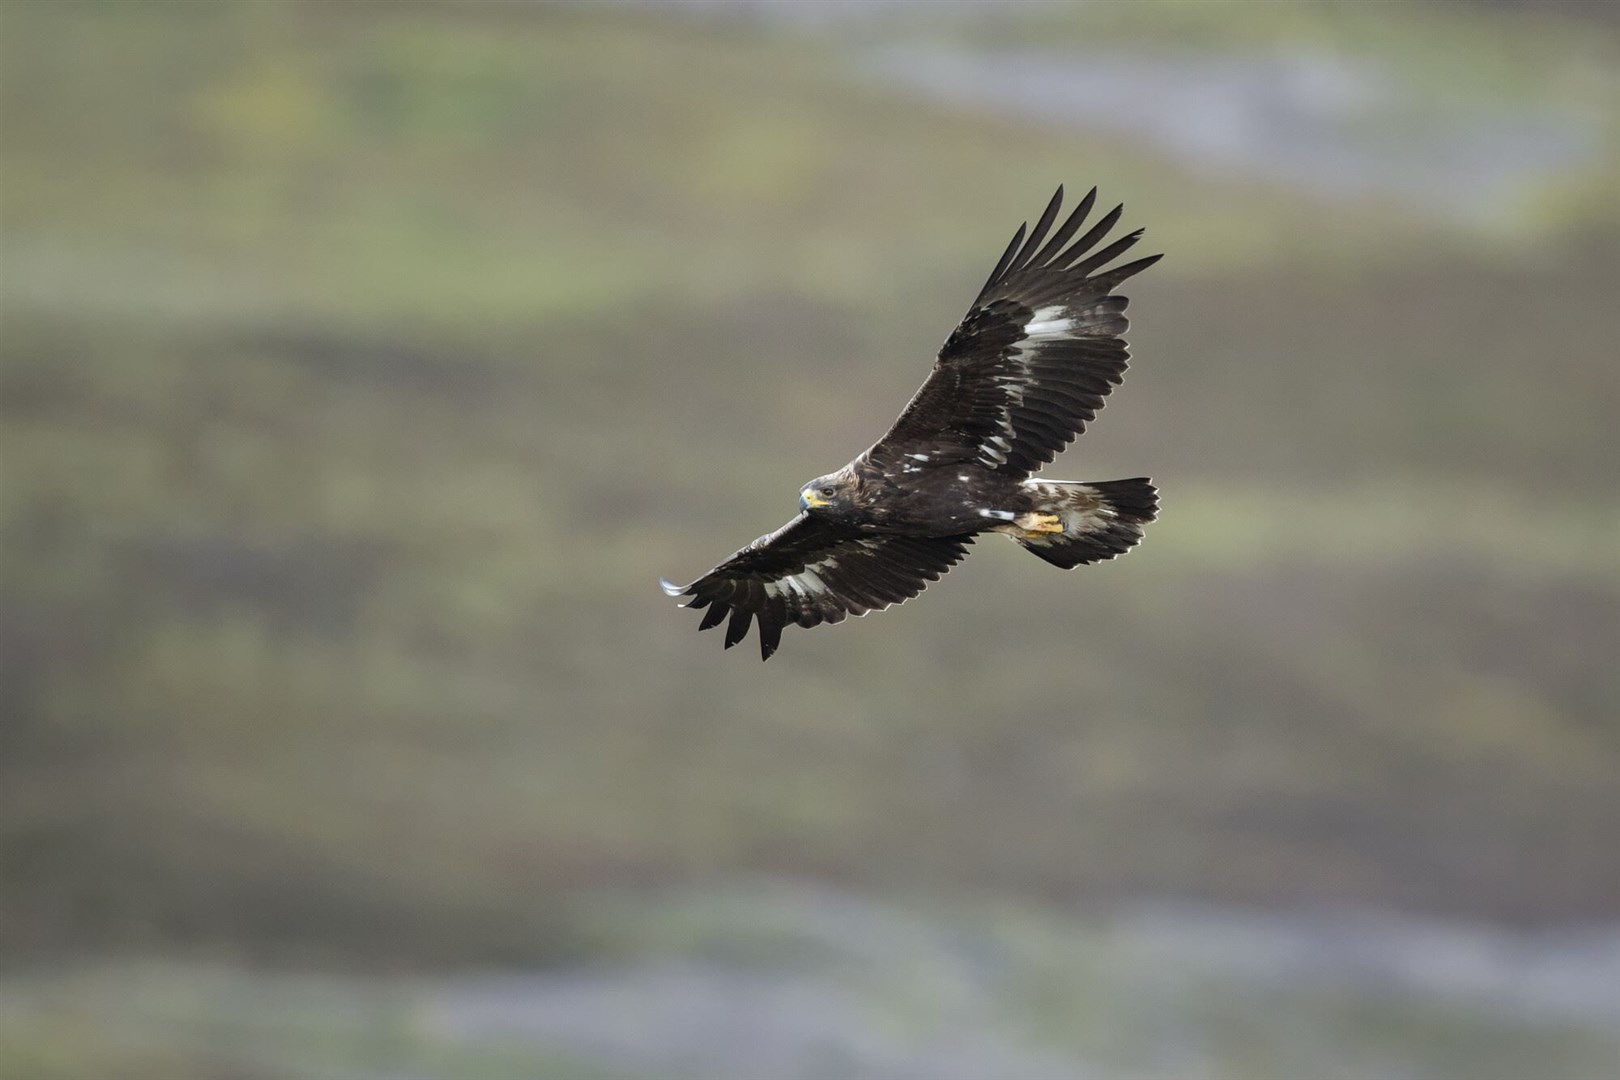 Ms Burgess has said new legislation will help tackle 'the scourge of wildlife crime and in particular the killing of Scotland’s golden eagles'. Picture: Mark Hamblin.